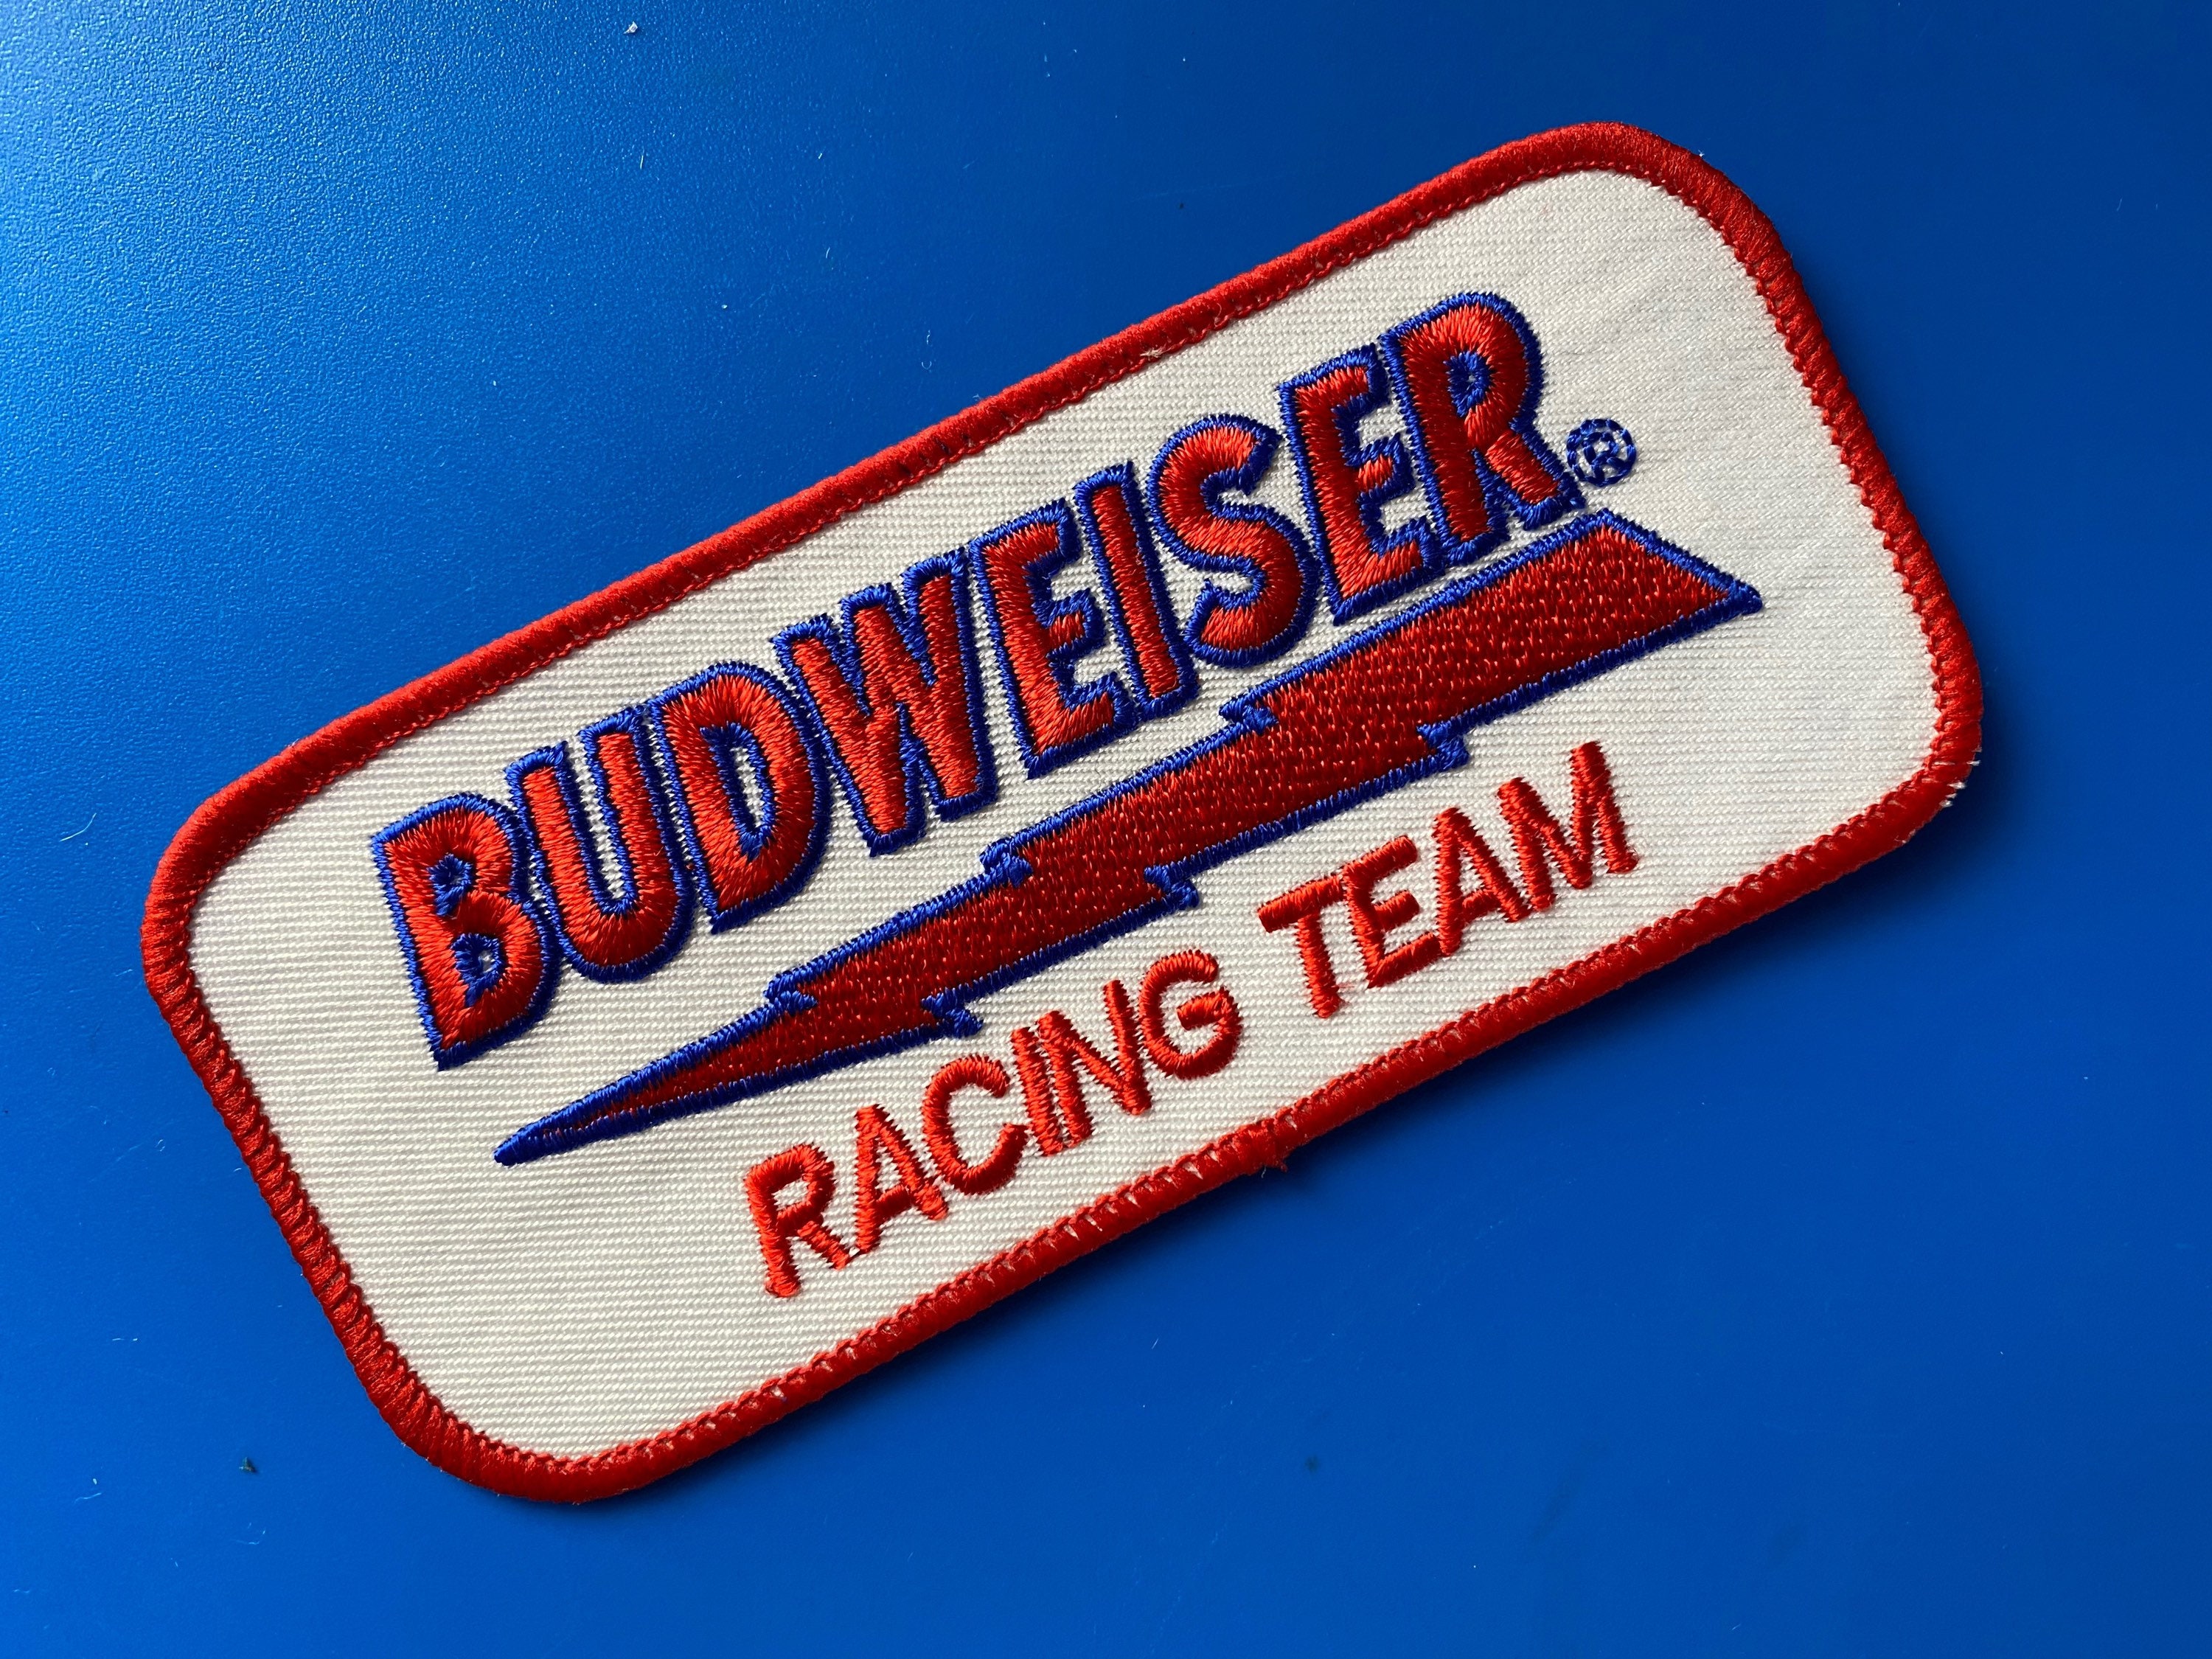 NEW 1 1/2 X 3 INCH BUDWEISER BEER BOW TIE IRON ON PATCH FREE SHIPPING 